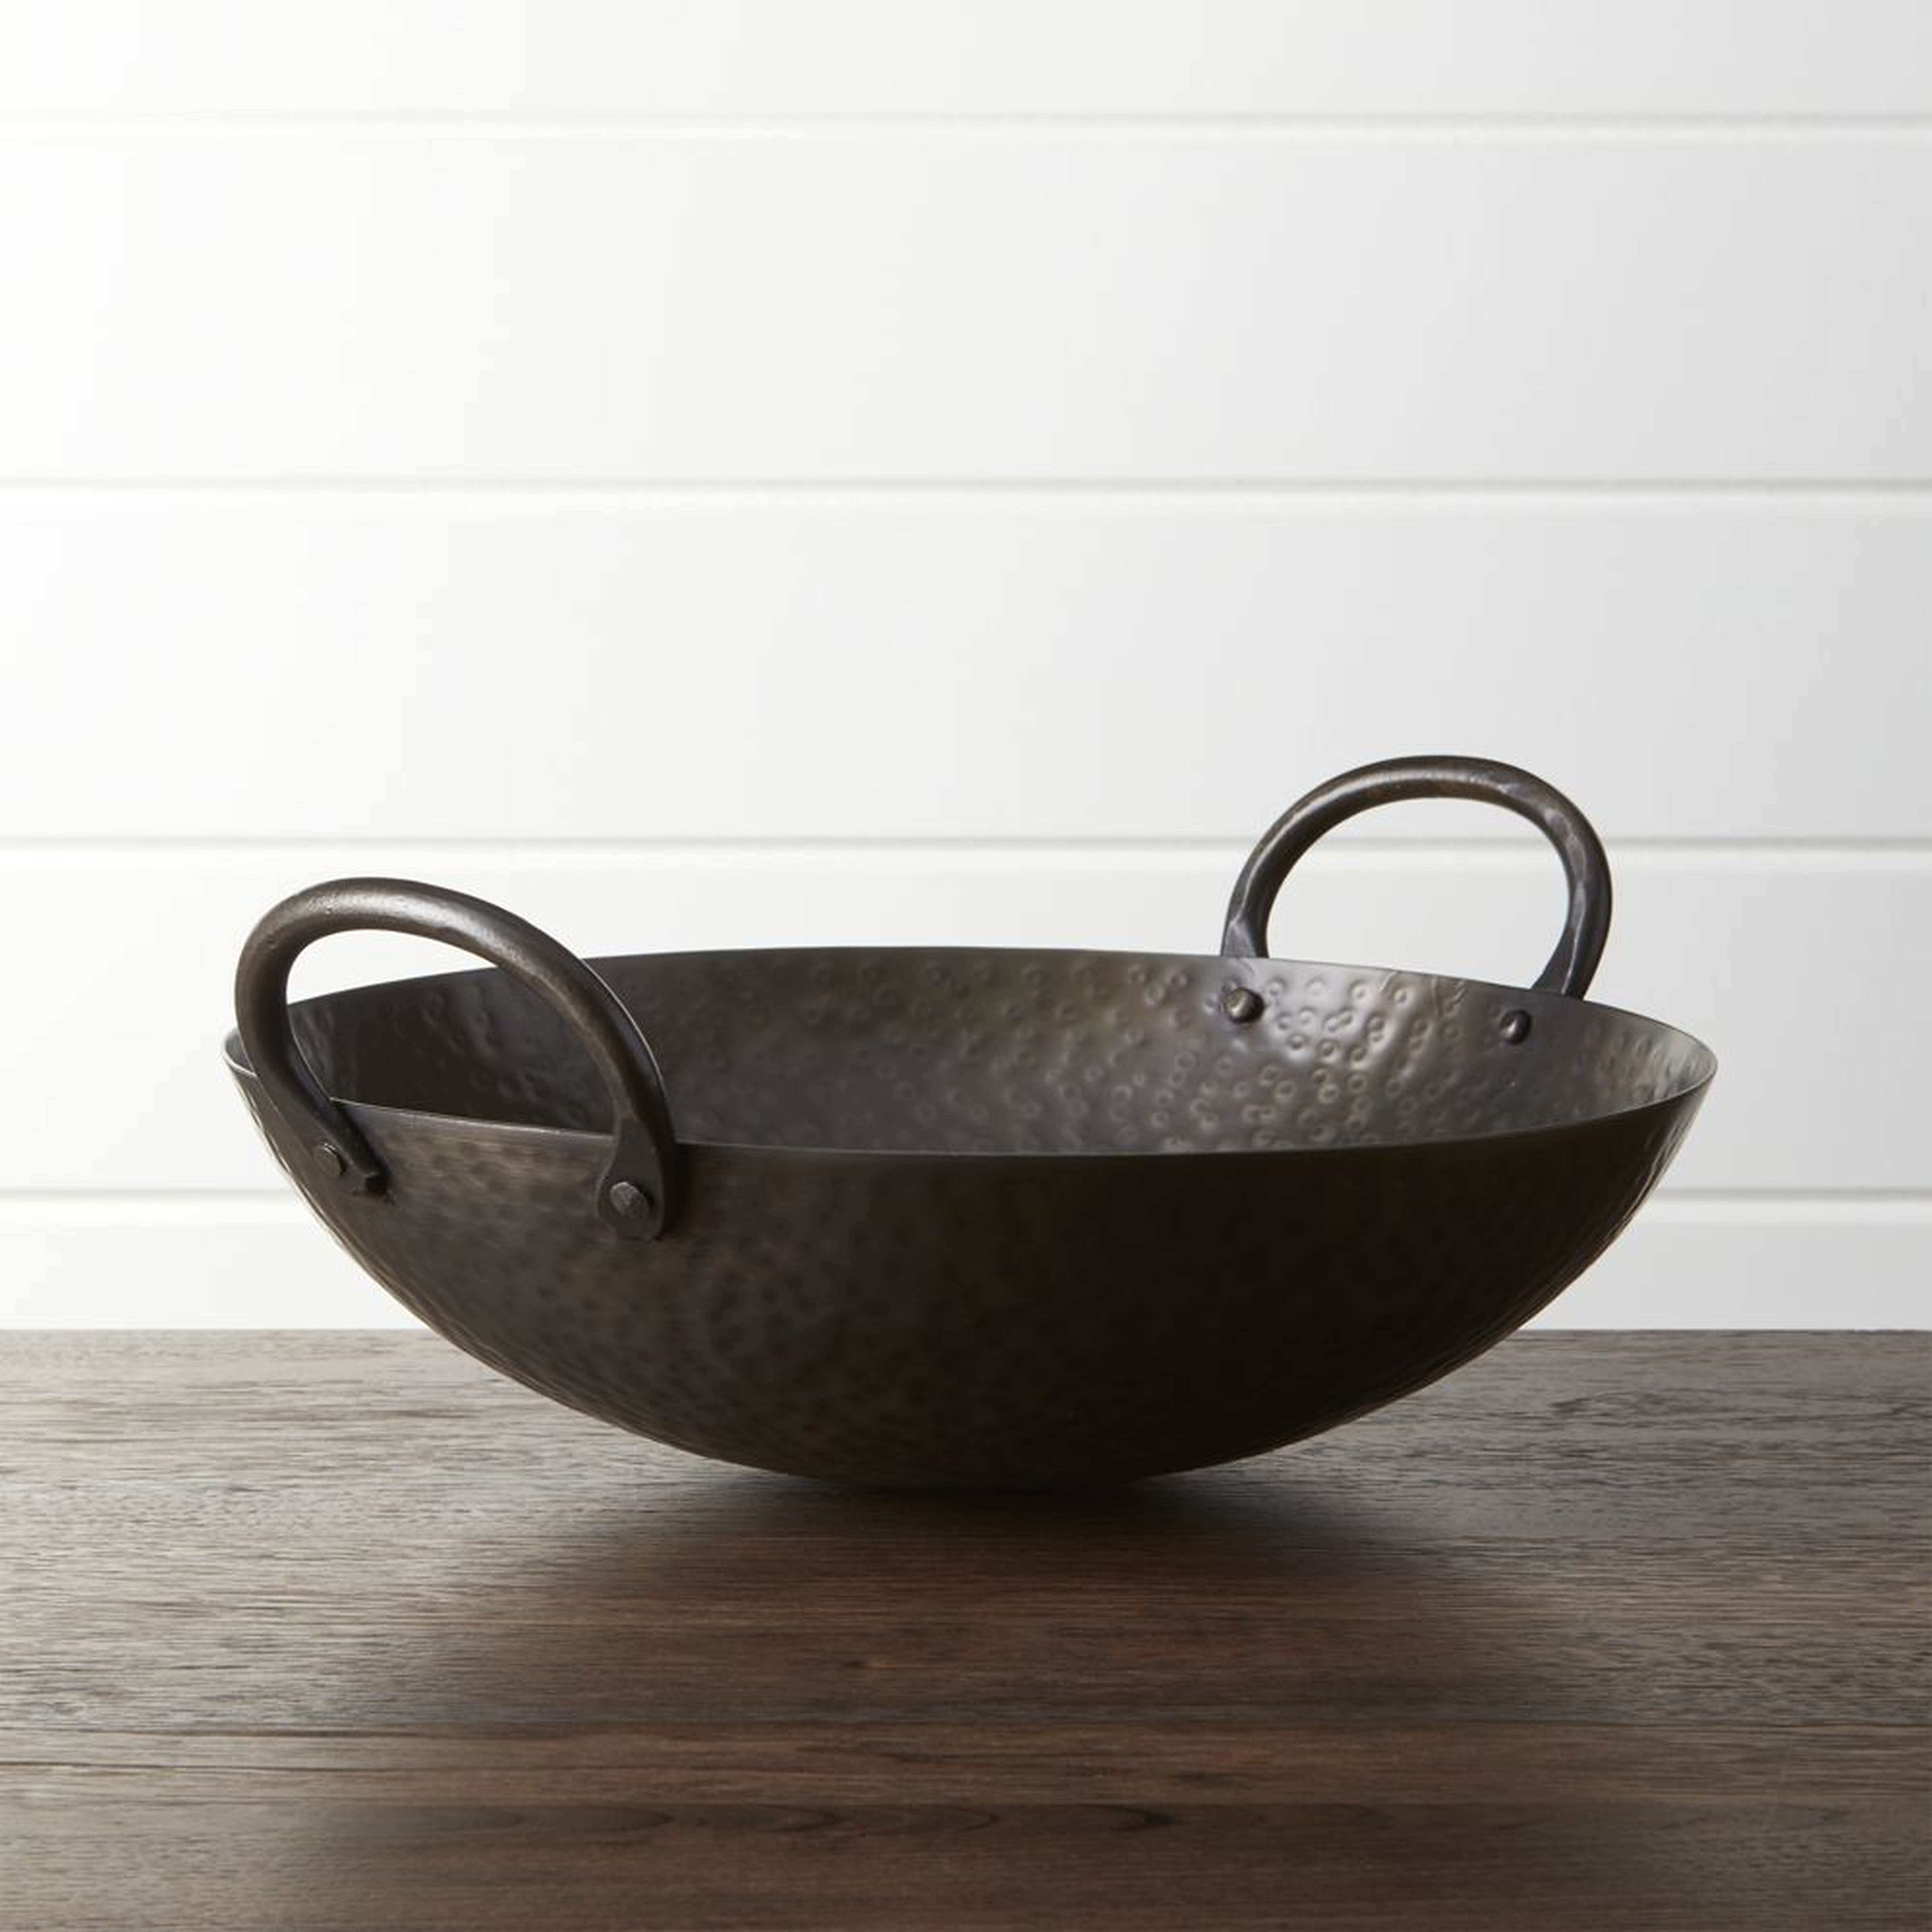 Feast Hammered Iron Serving Bowl with Handles - Crate and Barrel